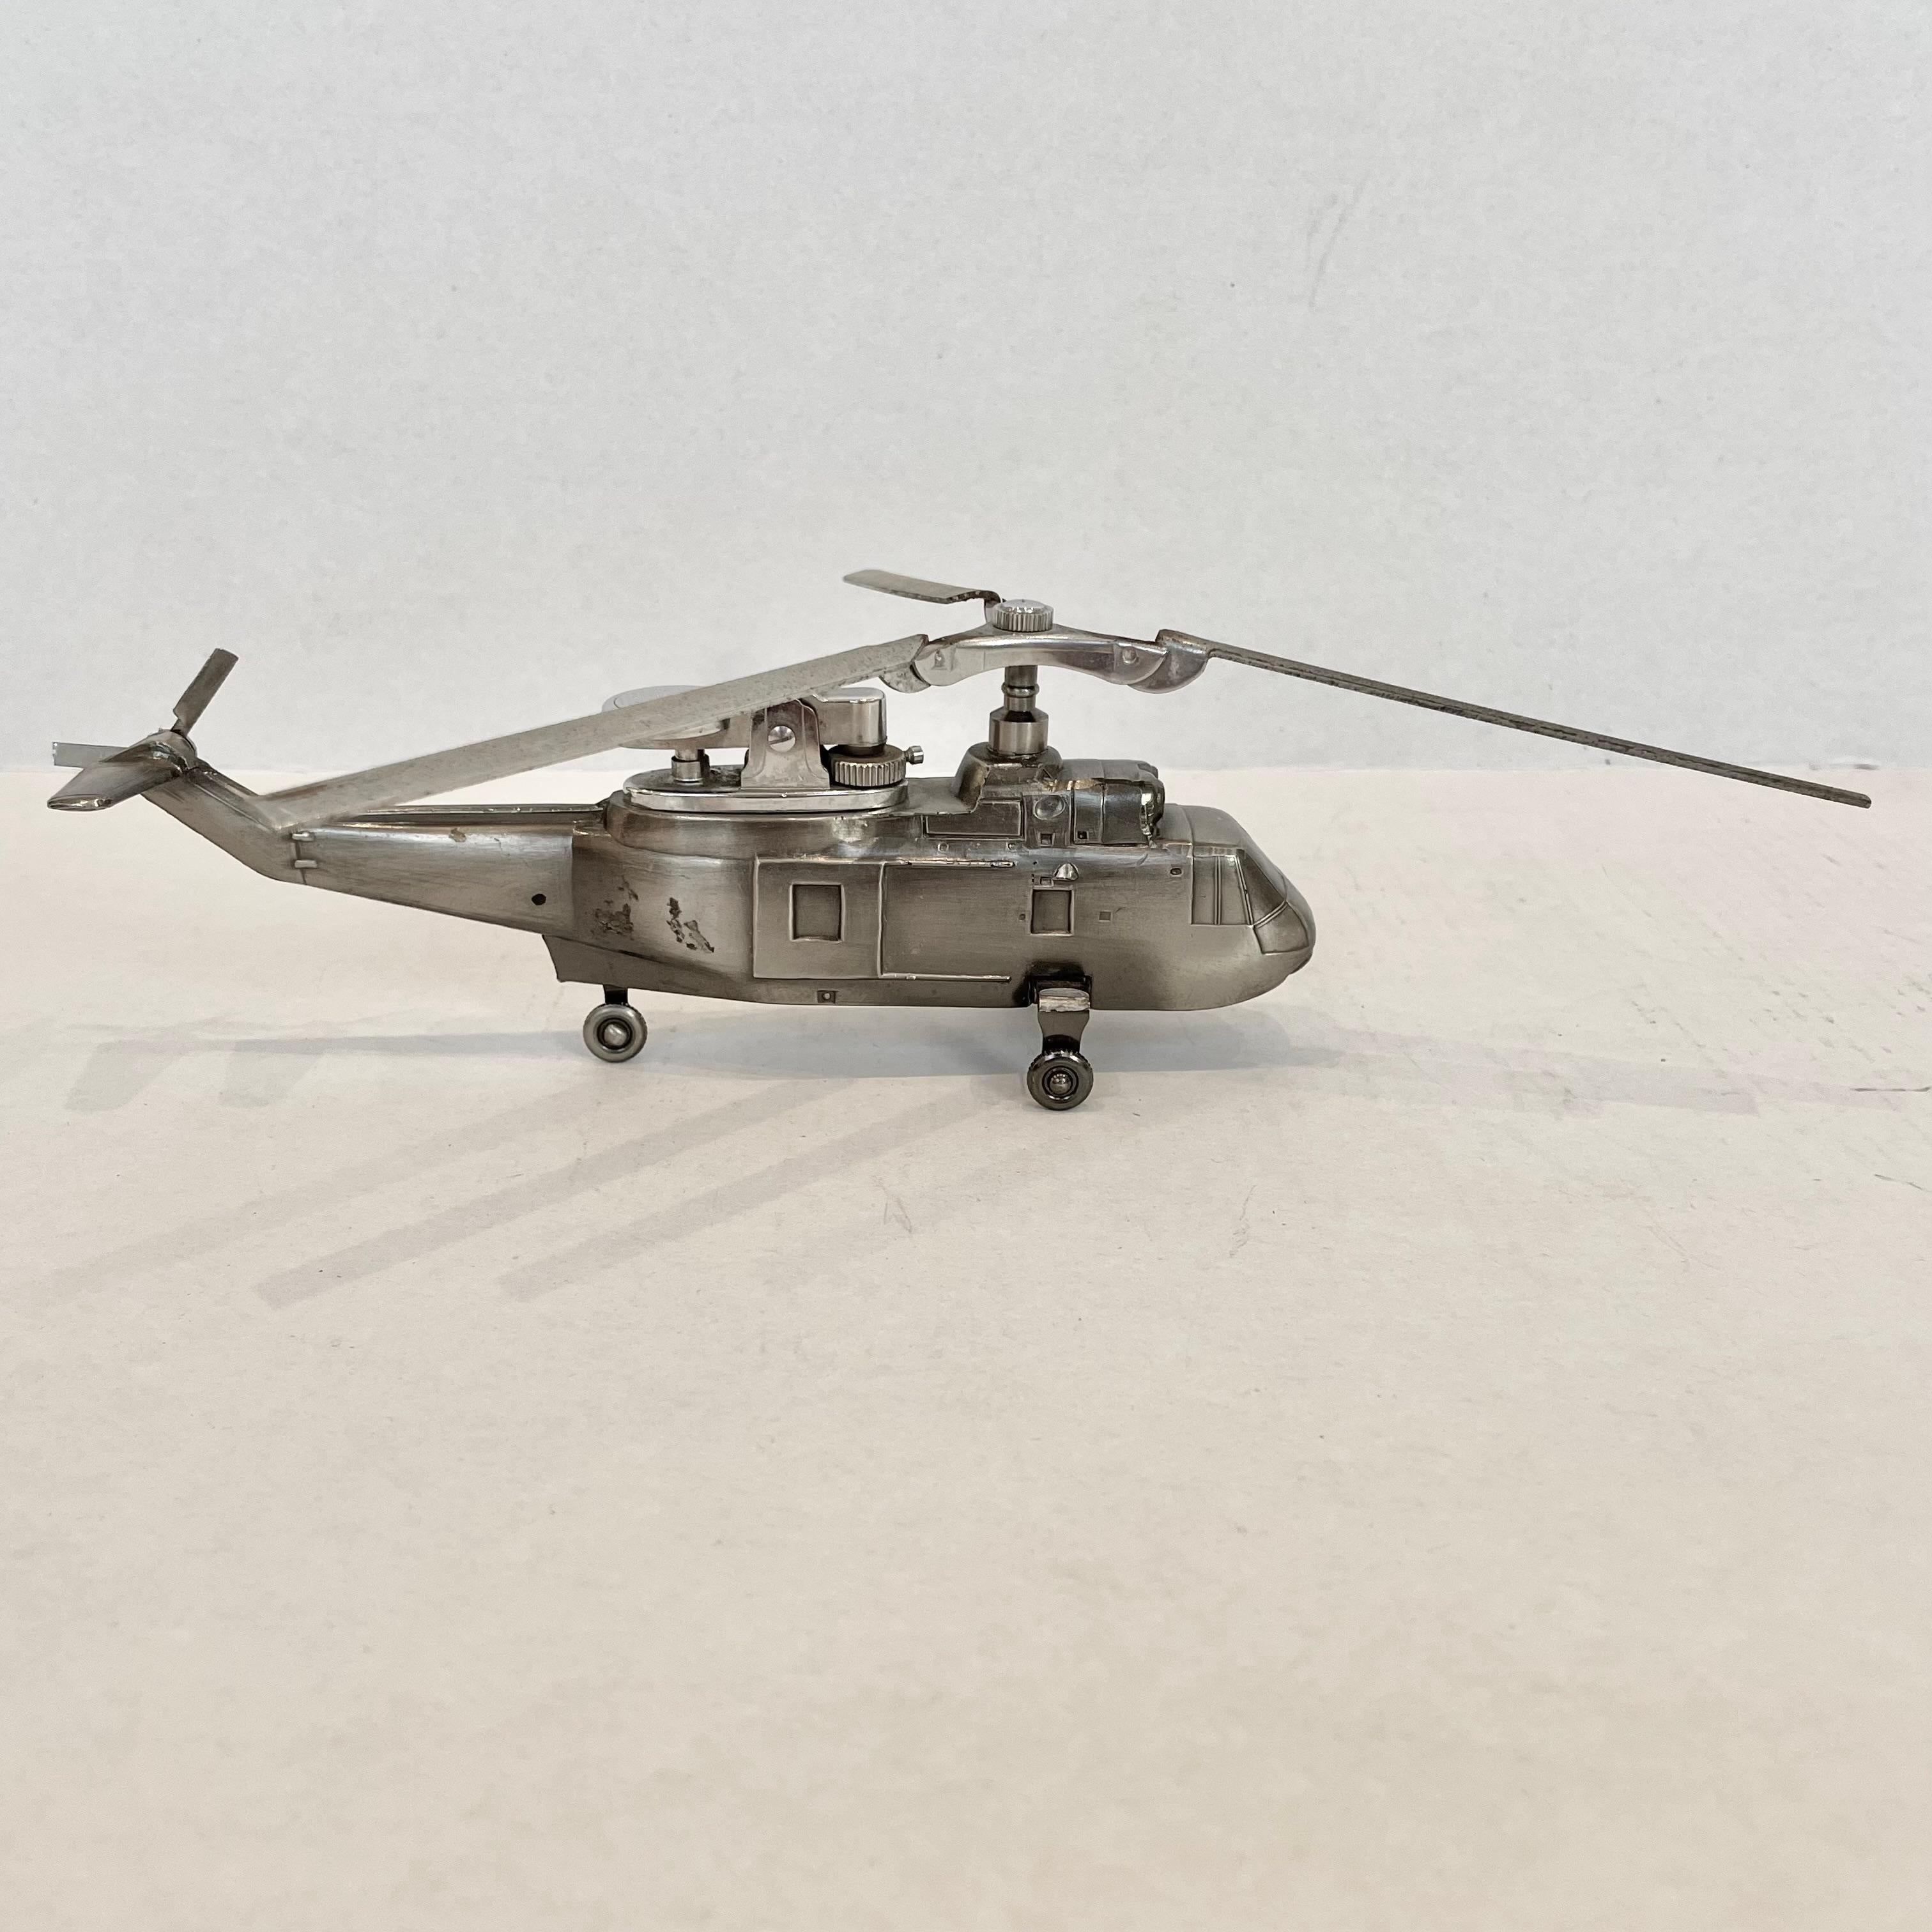 Cool vintage table lighter in the shape of a Skiorsky SH-3A/D Helicopter. Made in Japan, 1980s. This piece has great balance and details like propellers that spin and fold up. Cool tobacco accessory and conversation piece. Working lighter. Good